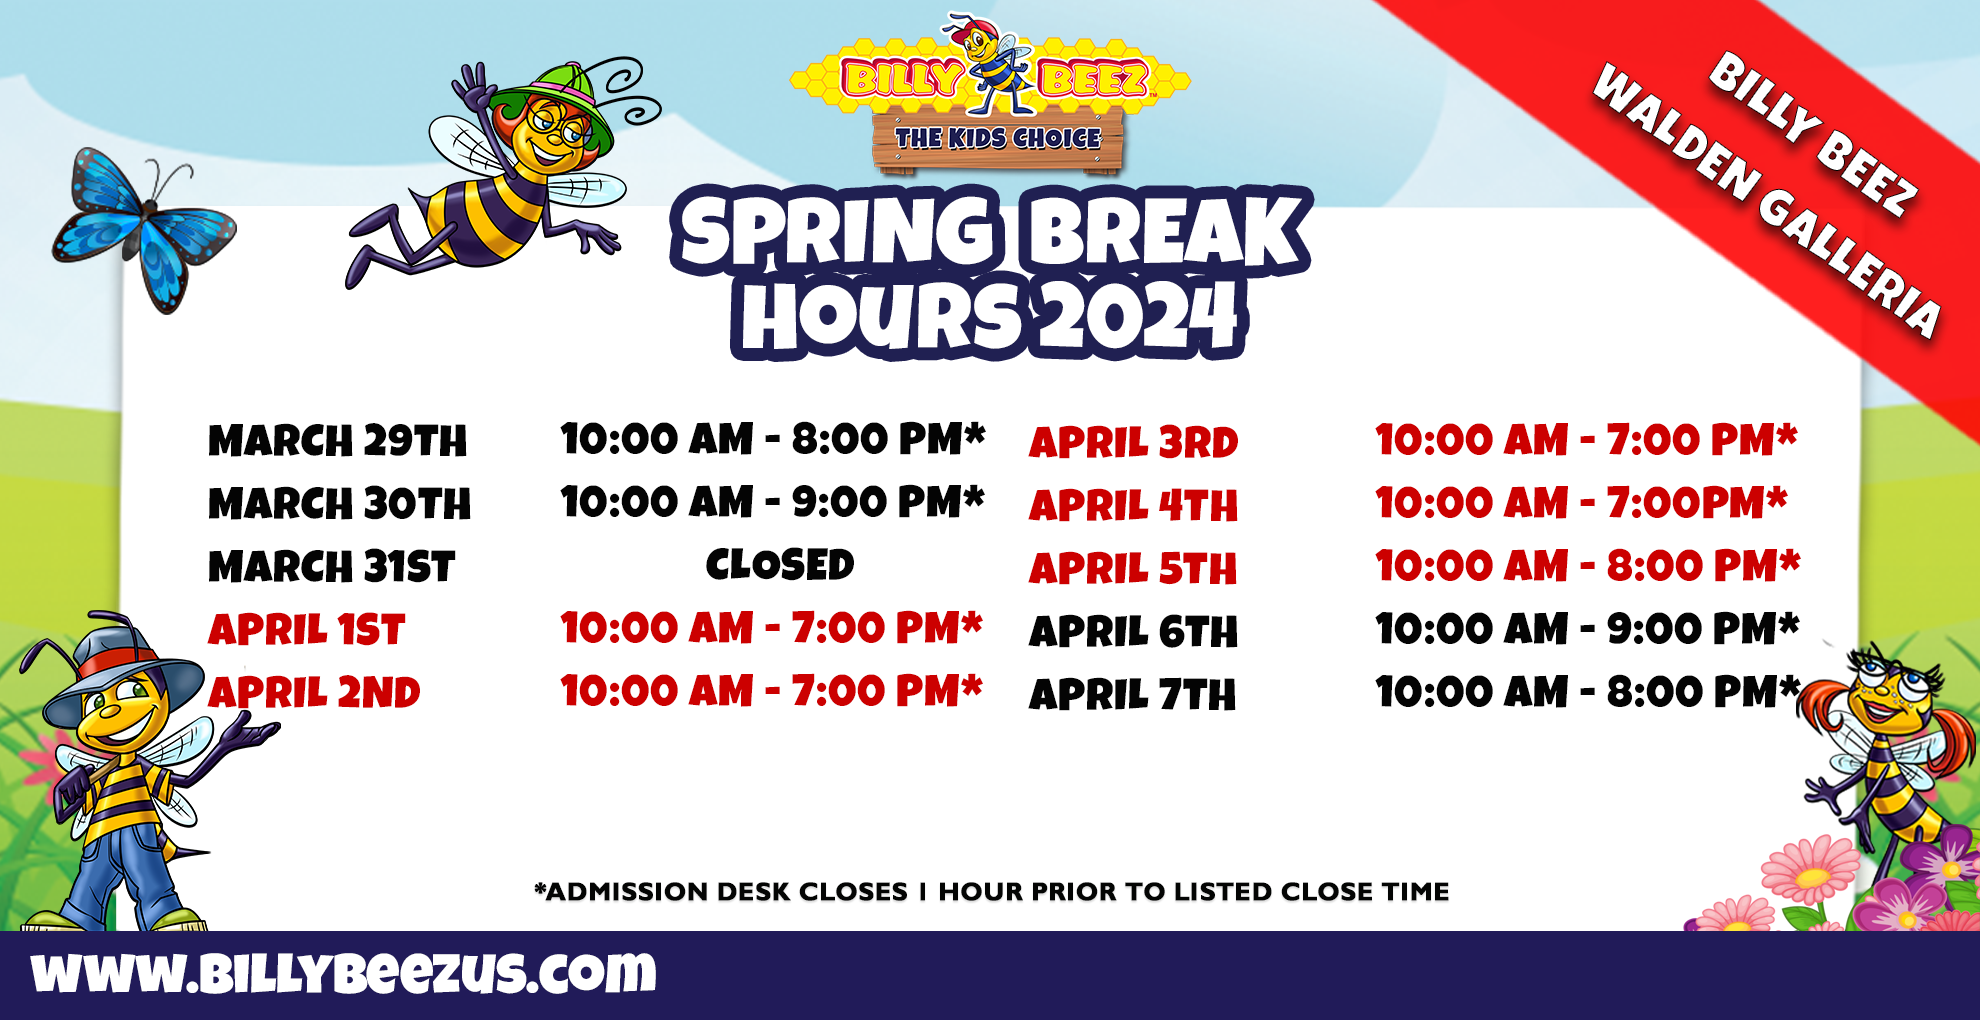 Billy Beez The Kids Choice Billy Beez Walden Galleria Spring Break Hours 2024 March 29th 10:00am-8:00pm* March 30th 10:00am-9:00pm* March 31st Closed April 1st 10:00am-7:00pm* April 2nd 10:00am-7:00pm* April 3rd 10:00am-7:00pm* April 4th 10:00am-7:00pm* April 5th 10:00am-8:00pm* April 6th 10:00am-9:00pm* April 7th 10:00am-8:00pm* *Admission desk closes 1 hour prior to listed close time